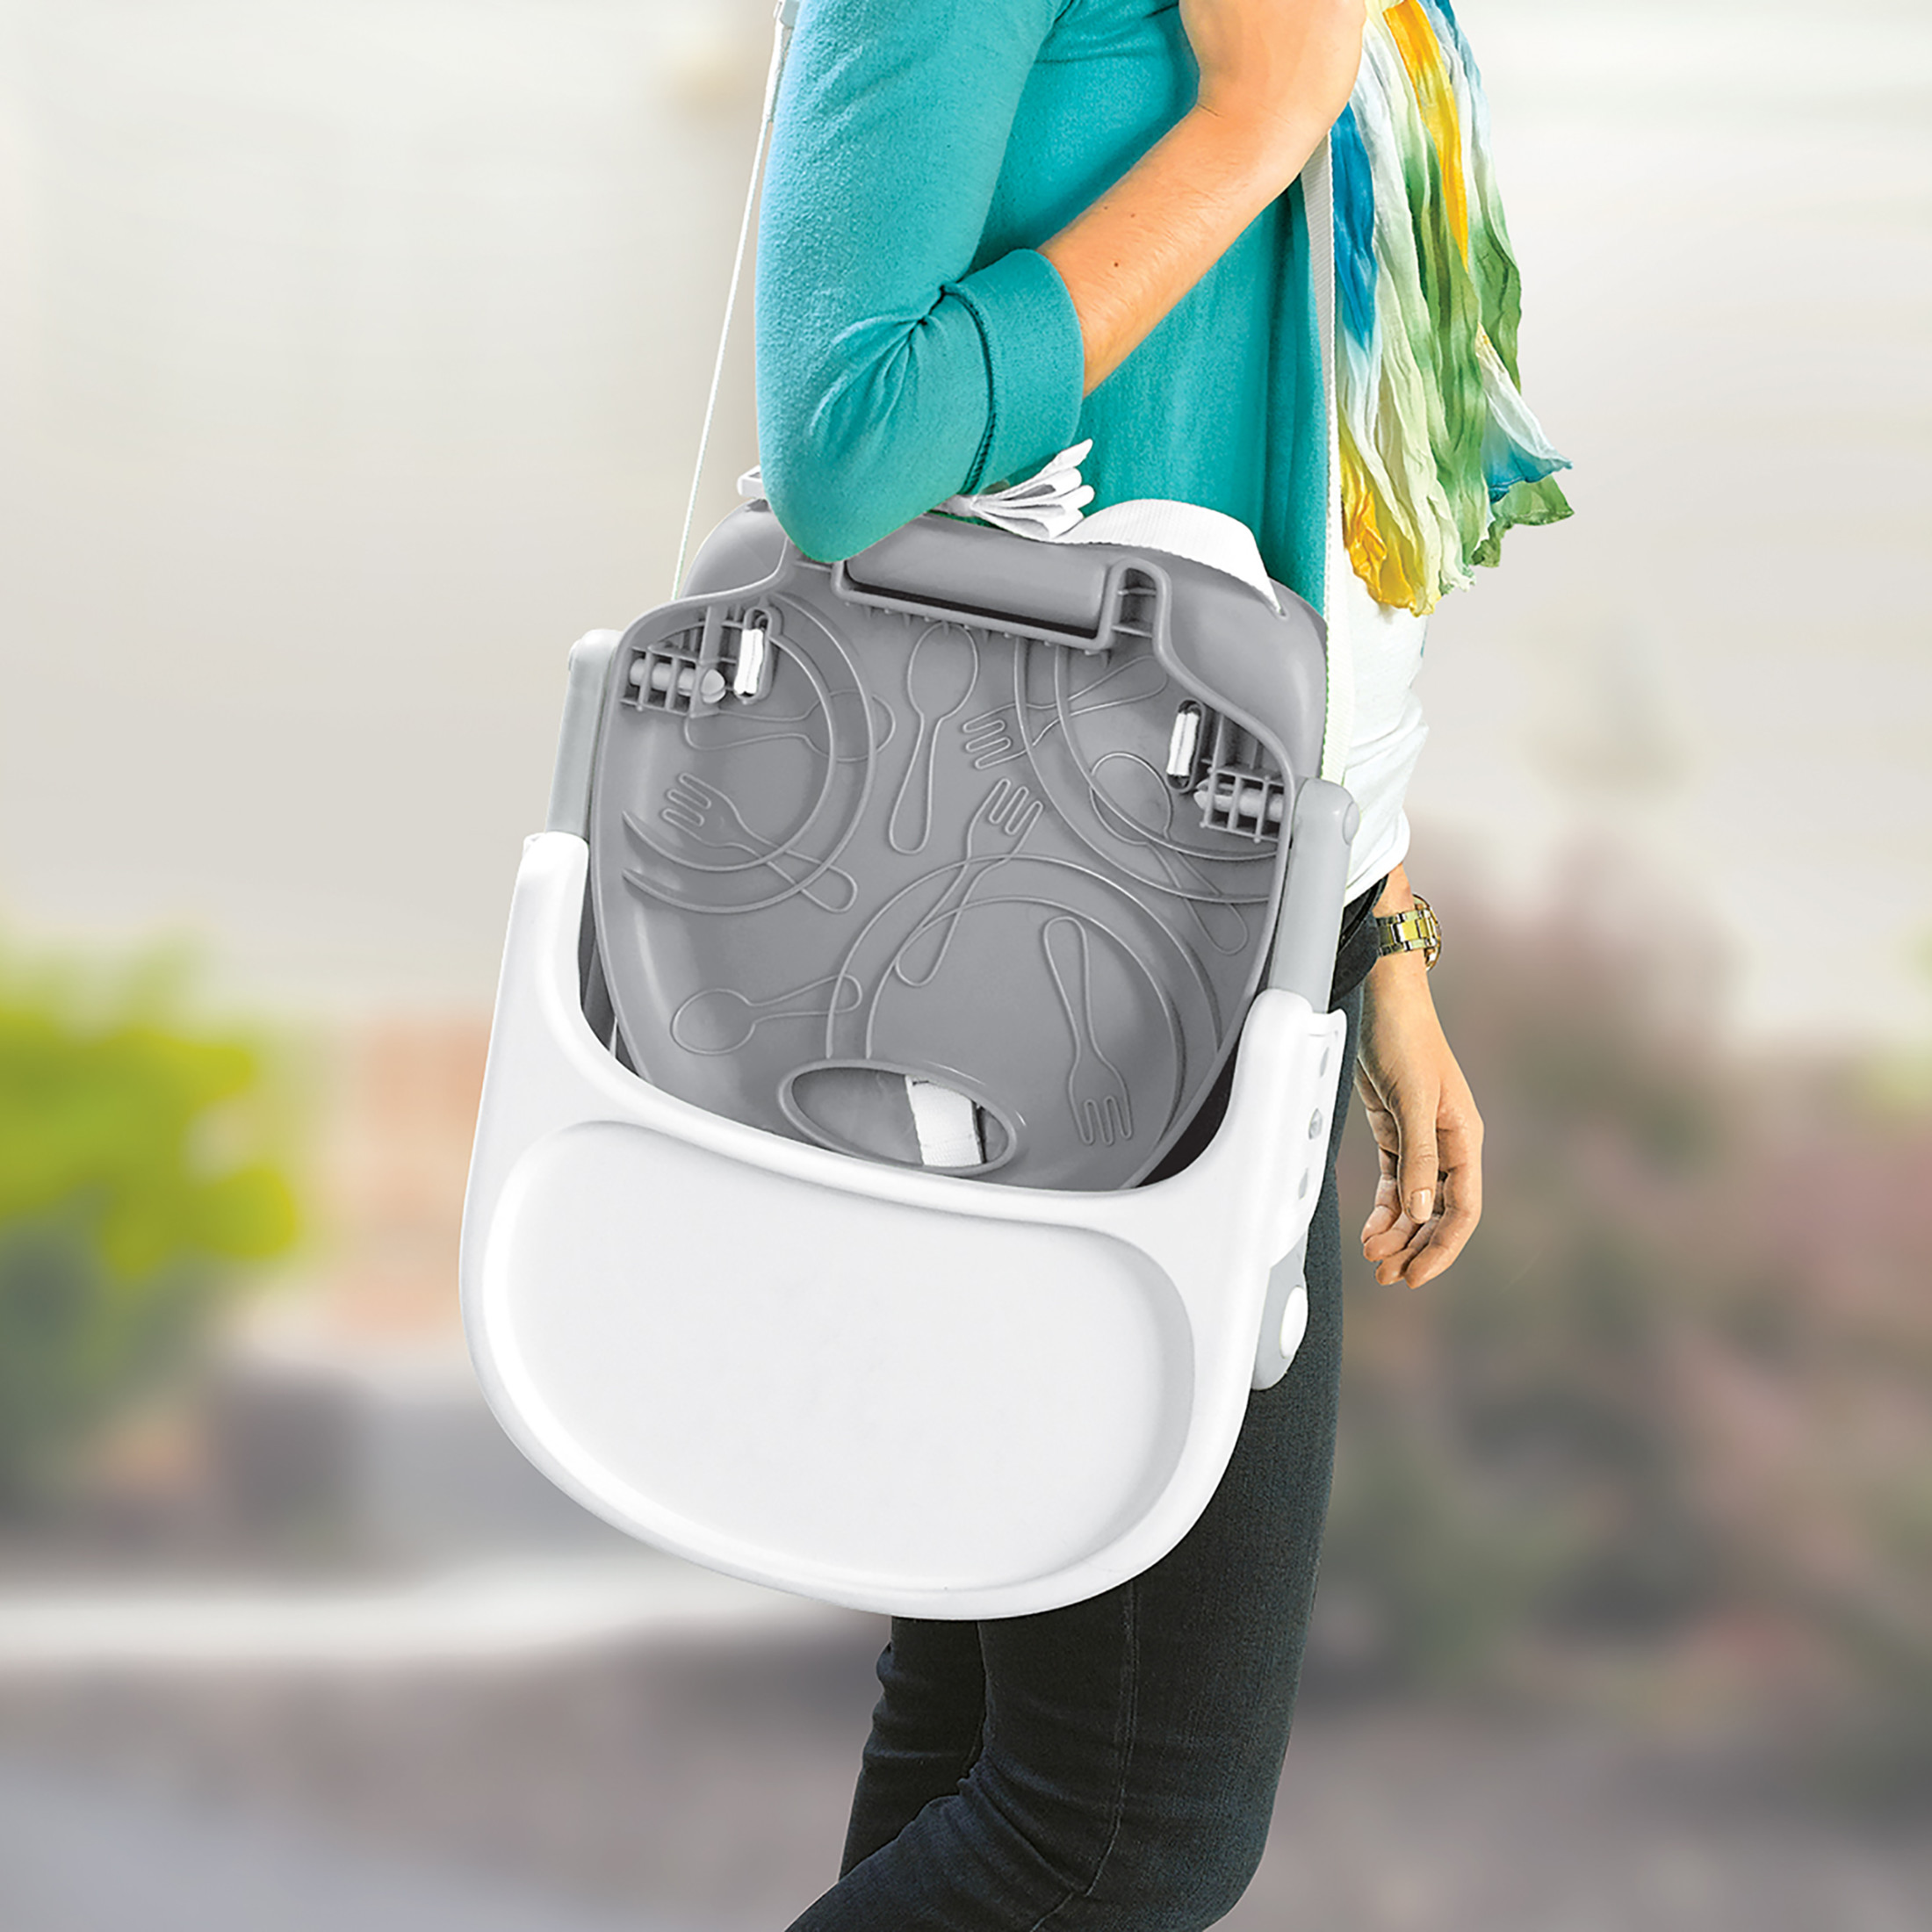 Chicco Pocket Snack Booster Seat for Babies and Toddlers with Removable Tray - Grey (Grey) - image 4 of 7